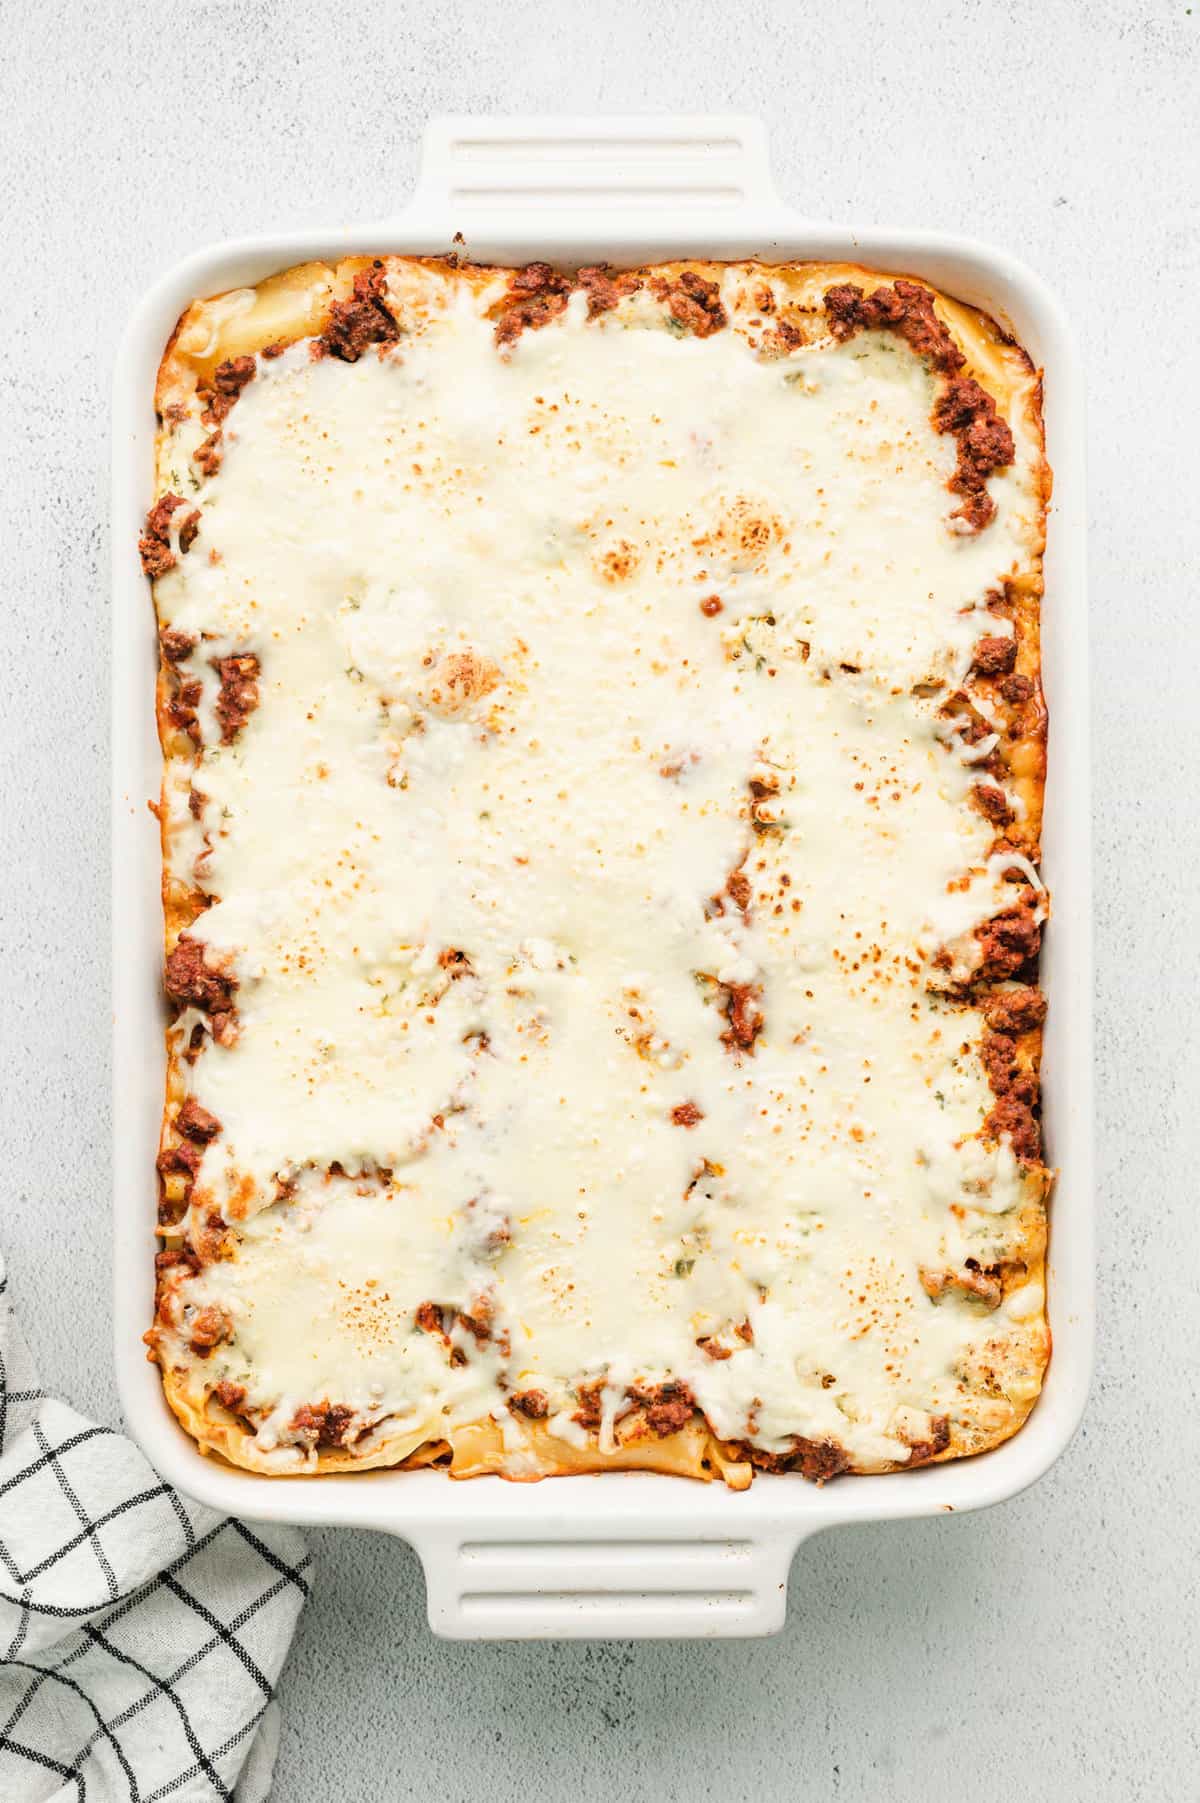 Easy Lasagna in baking dish just out of the oven